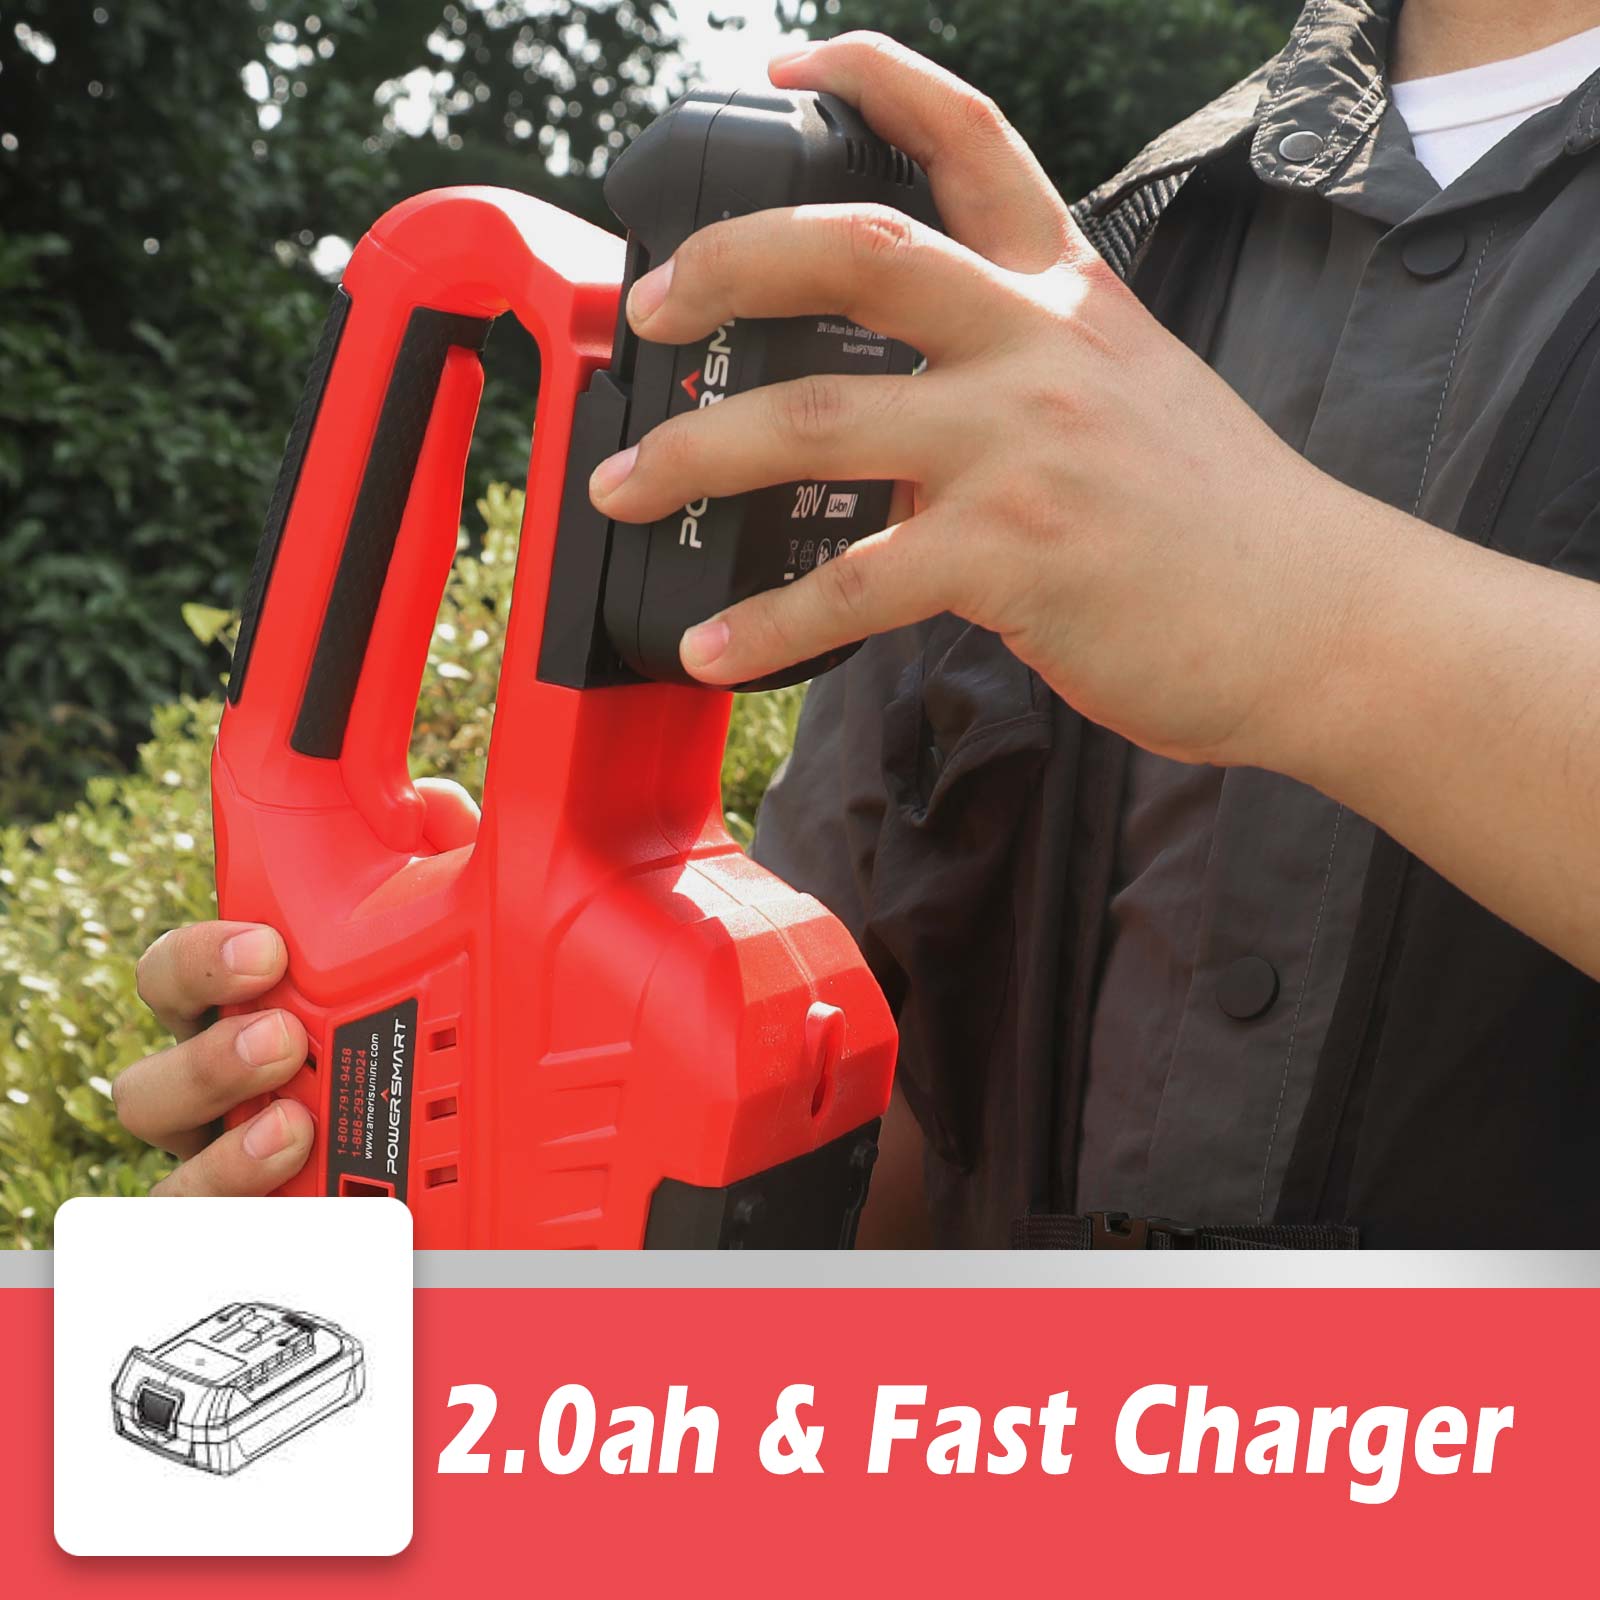 20V 18 Cordless Hedge Trimmer PS76106A